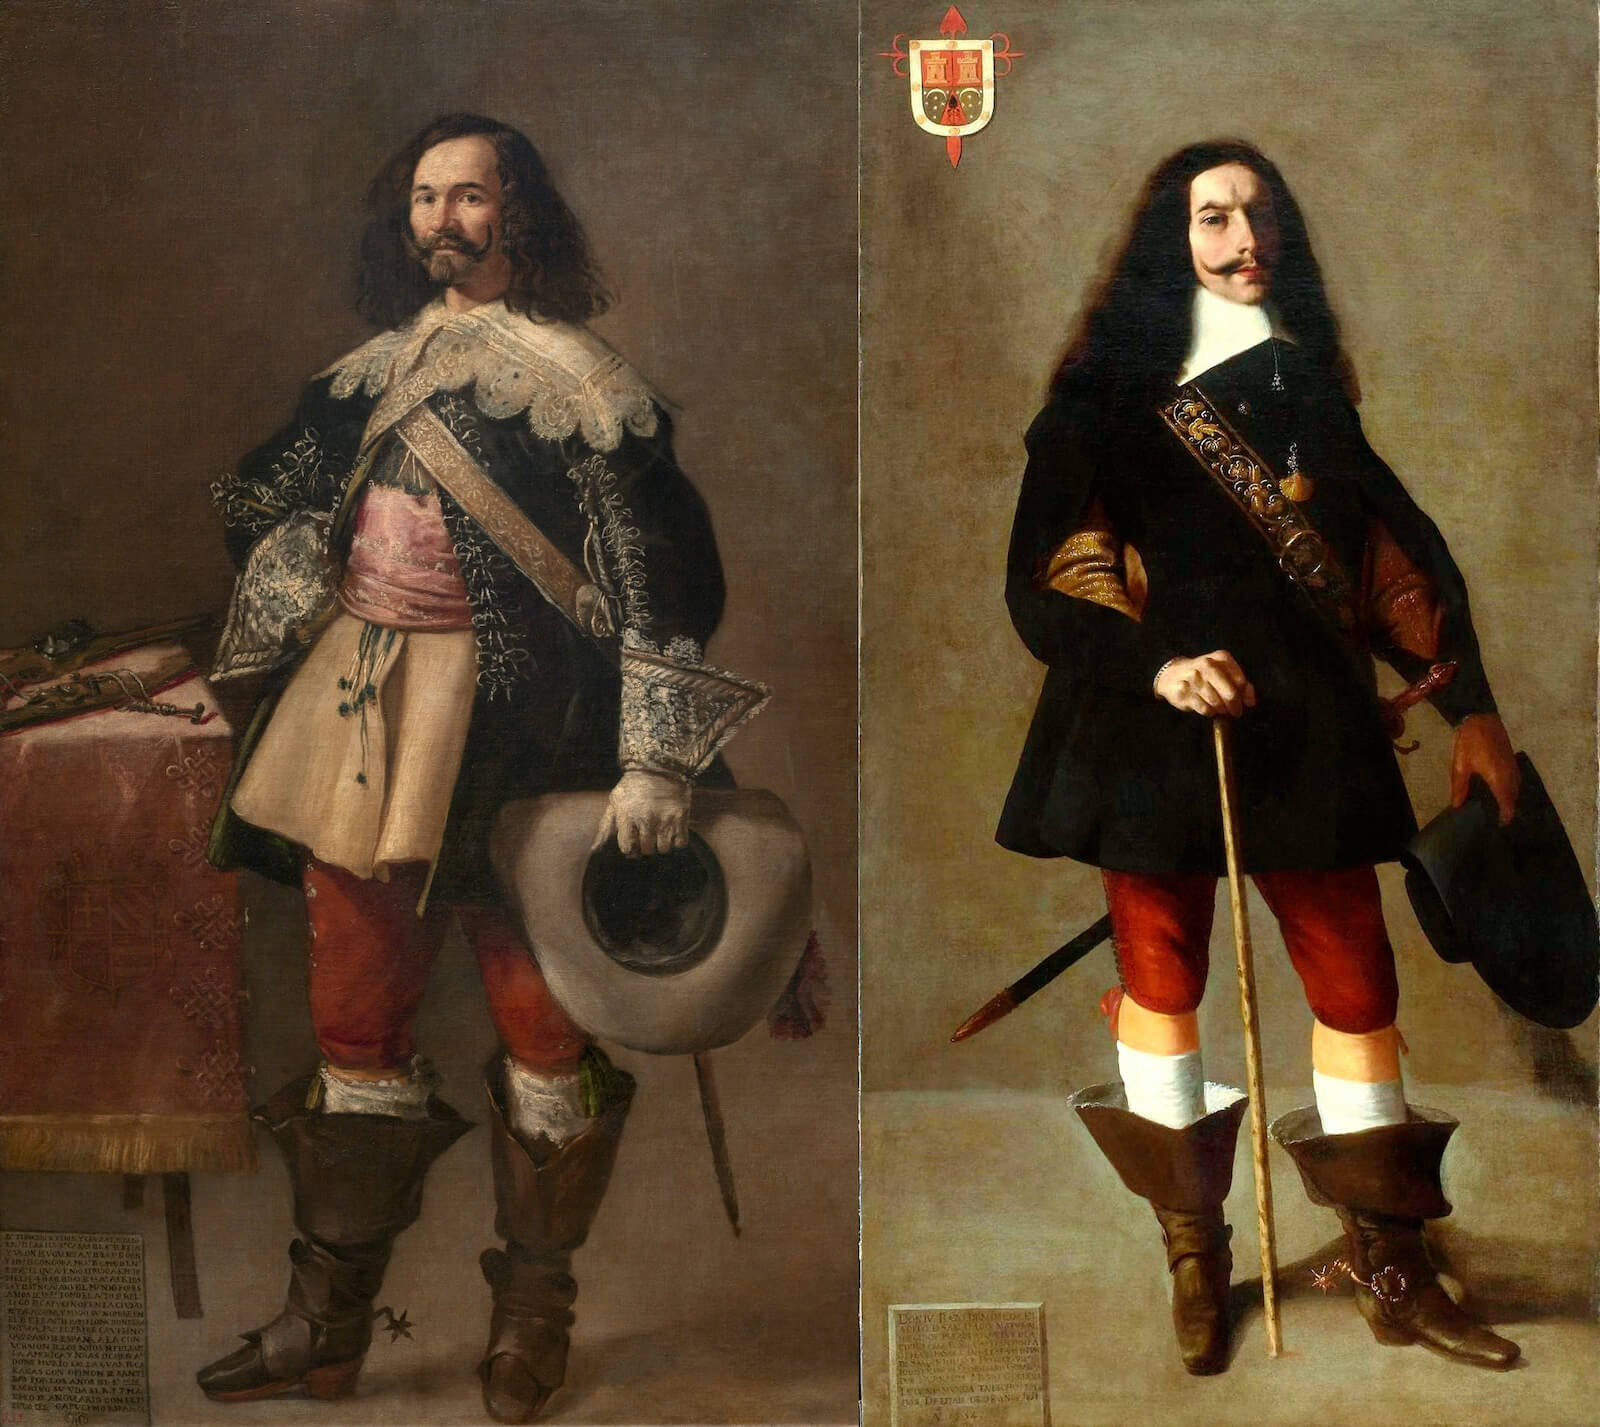 The Tercios' clothing. Spanish military fashion in the 17th century (1600-1650)